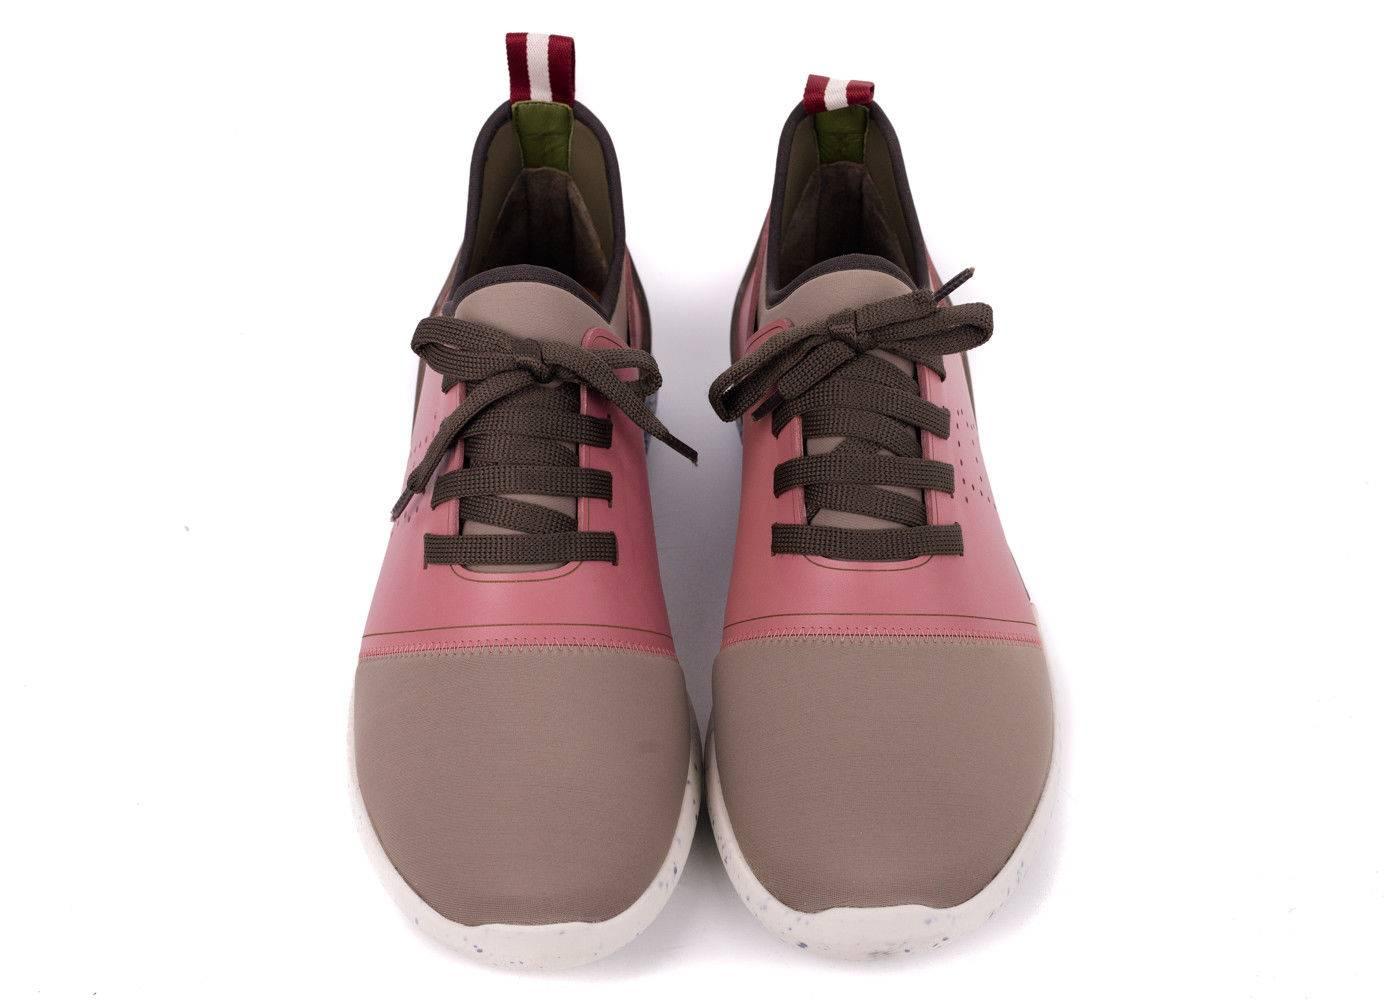 Bally's Avelle sneakers in a light brown and pink color tone with water marked designs on the outer sole. These sneakers are the perfect pair to have for this incoming spring summer season. Pair it with your favorite denim jeans and top for a laid